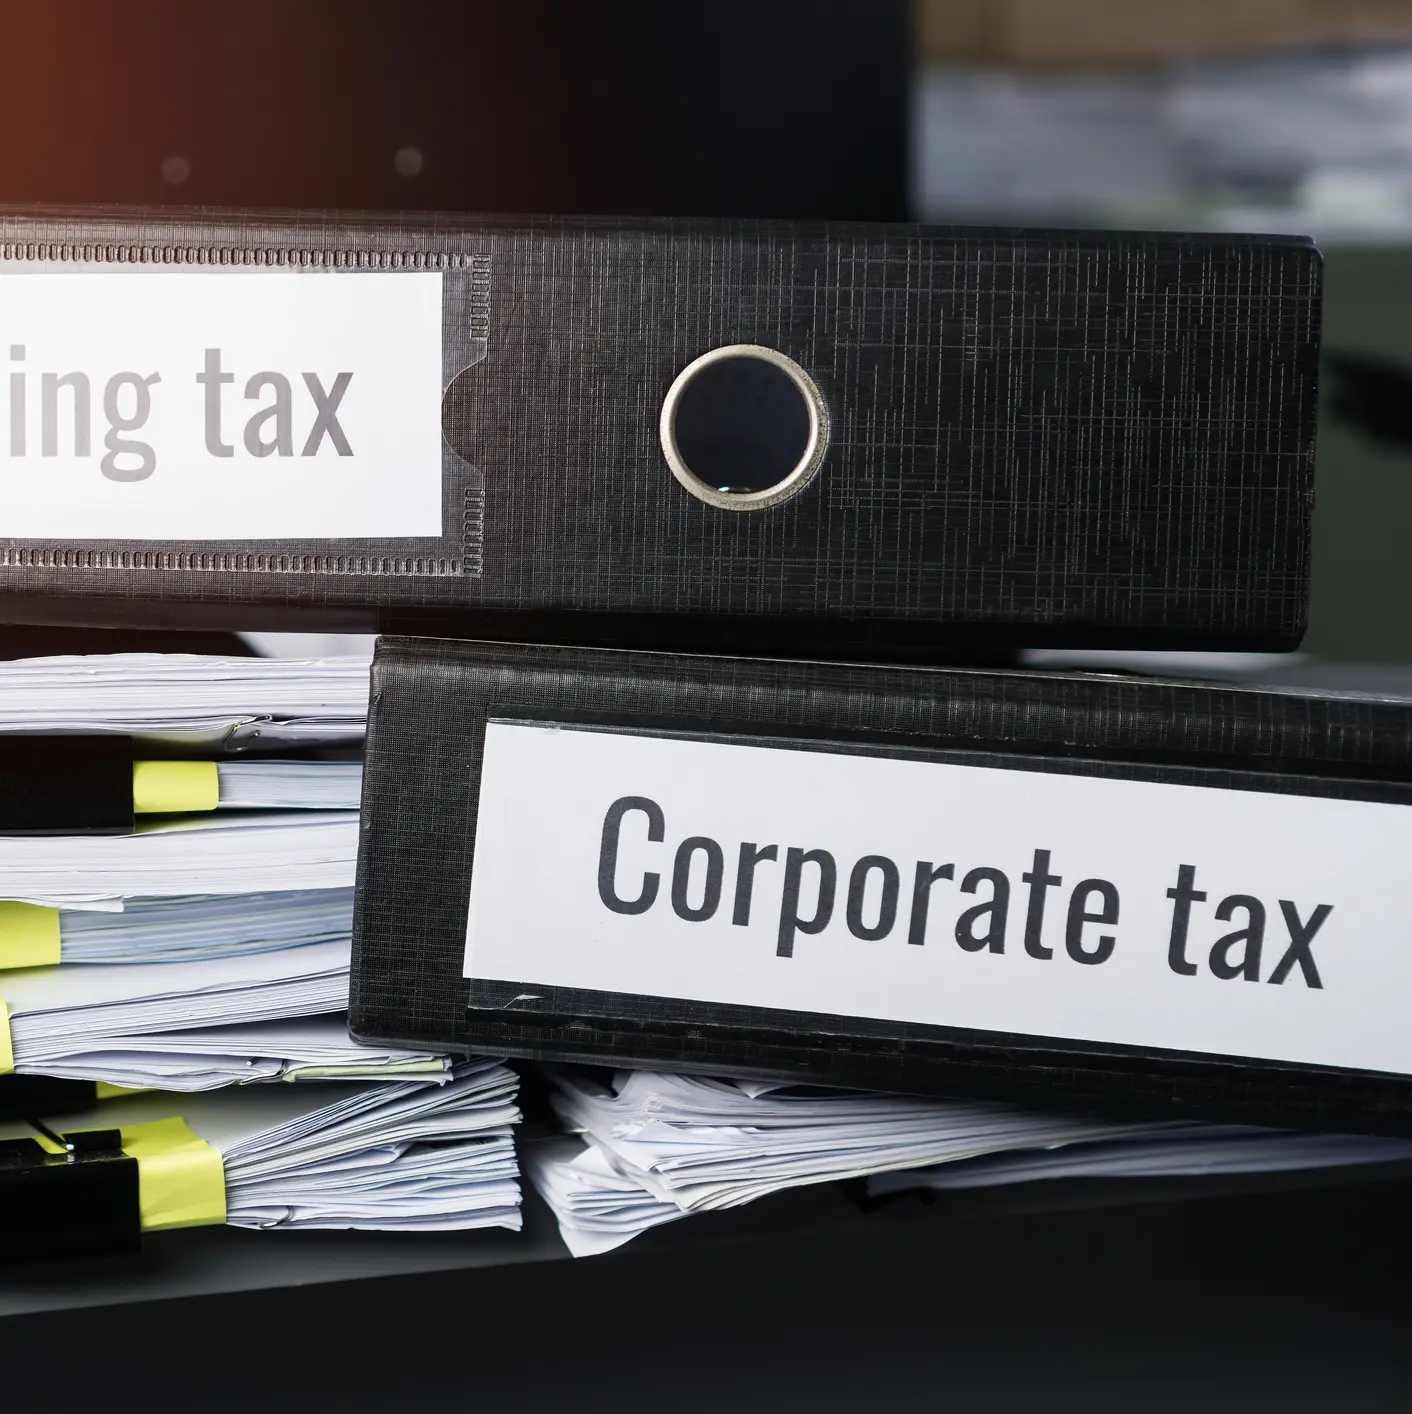 UAE corporate tax will increase transparency, change company structures – KPMG CEO